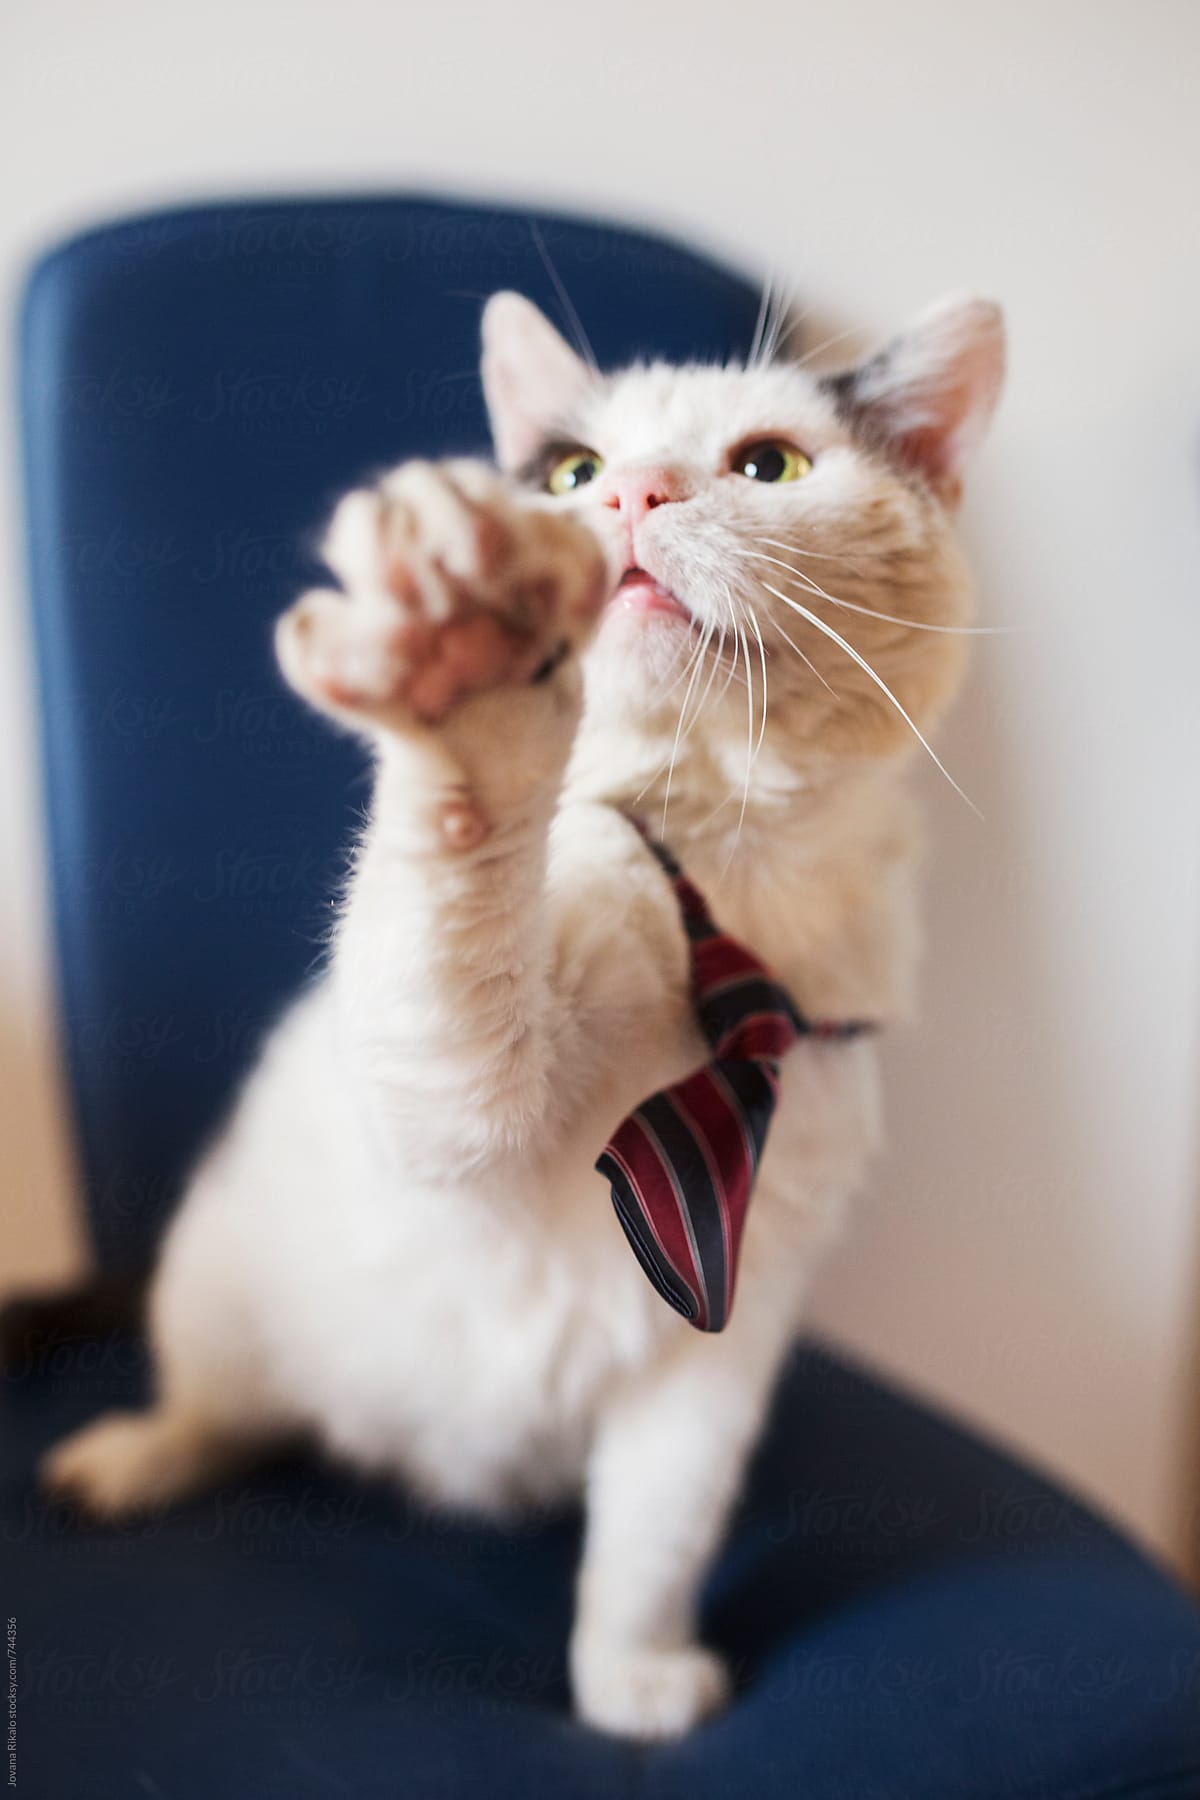 Fashionable cat with a tie